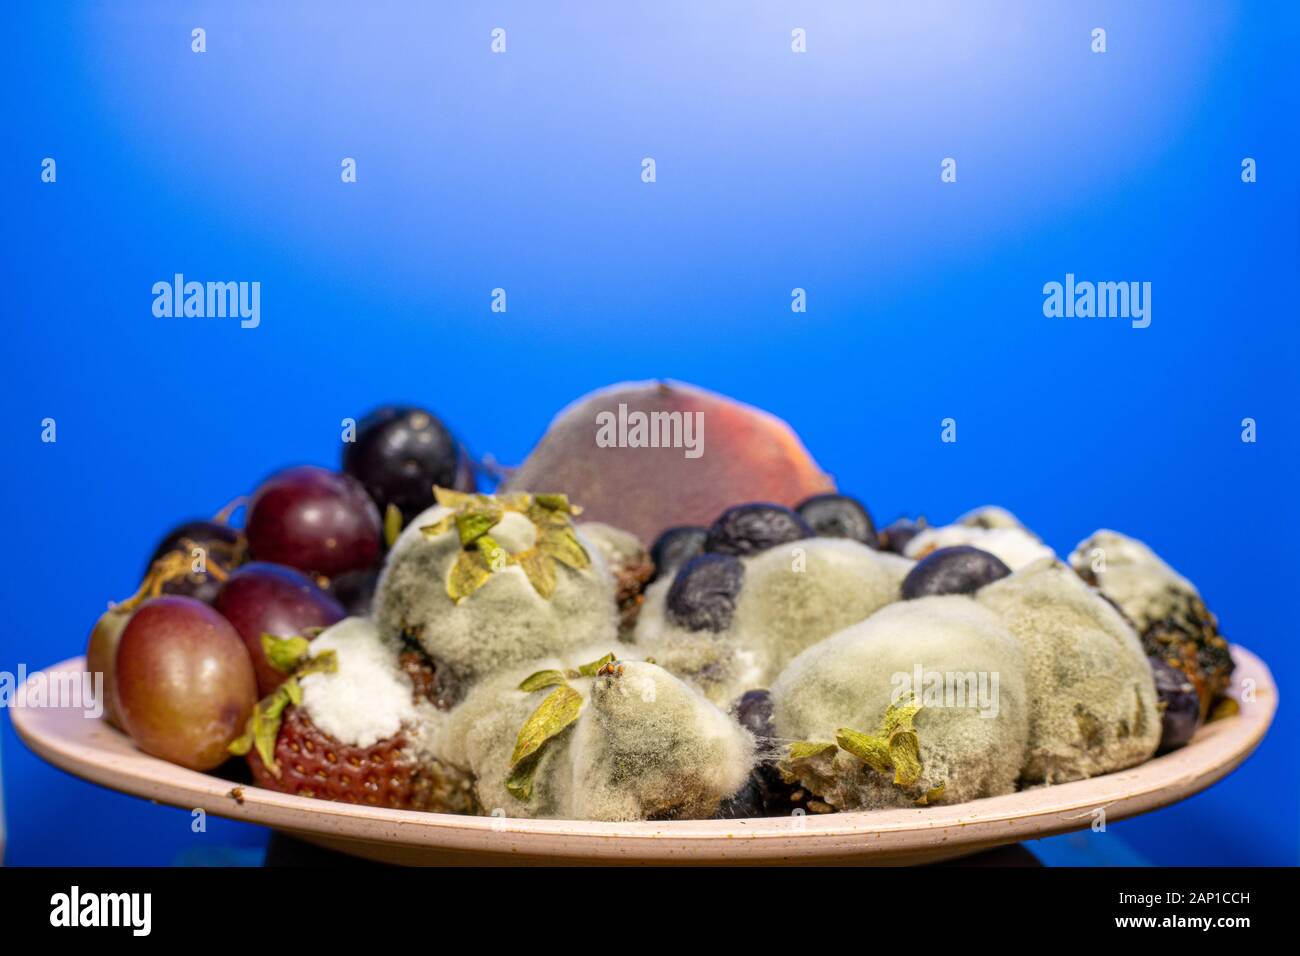 Fruits and berries in a cup rotted and moldy Stock Photo